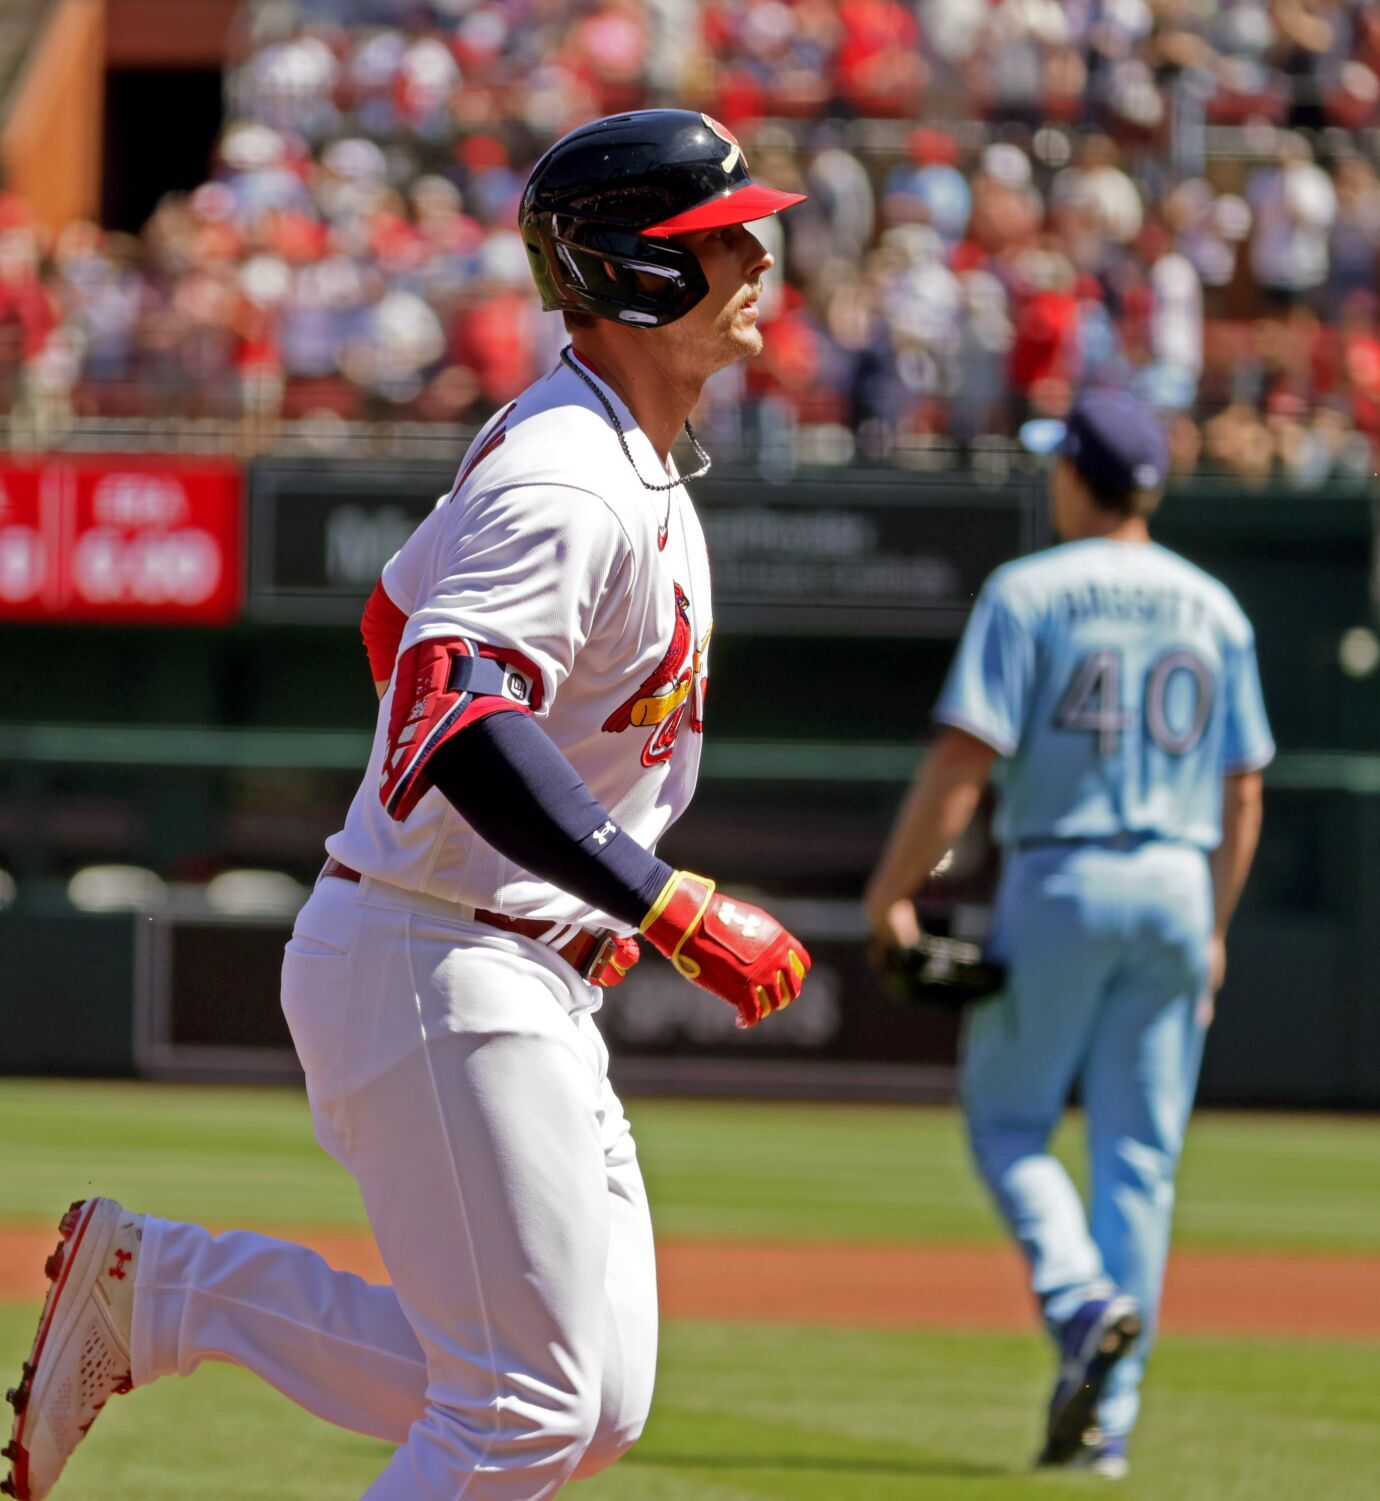 Hochman The Cardinals are sure hitting with assurance (and hounded Bassitt in process)